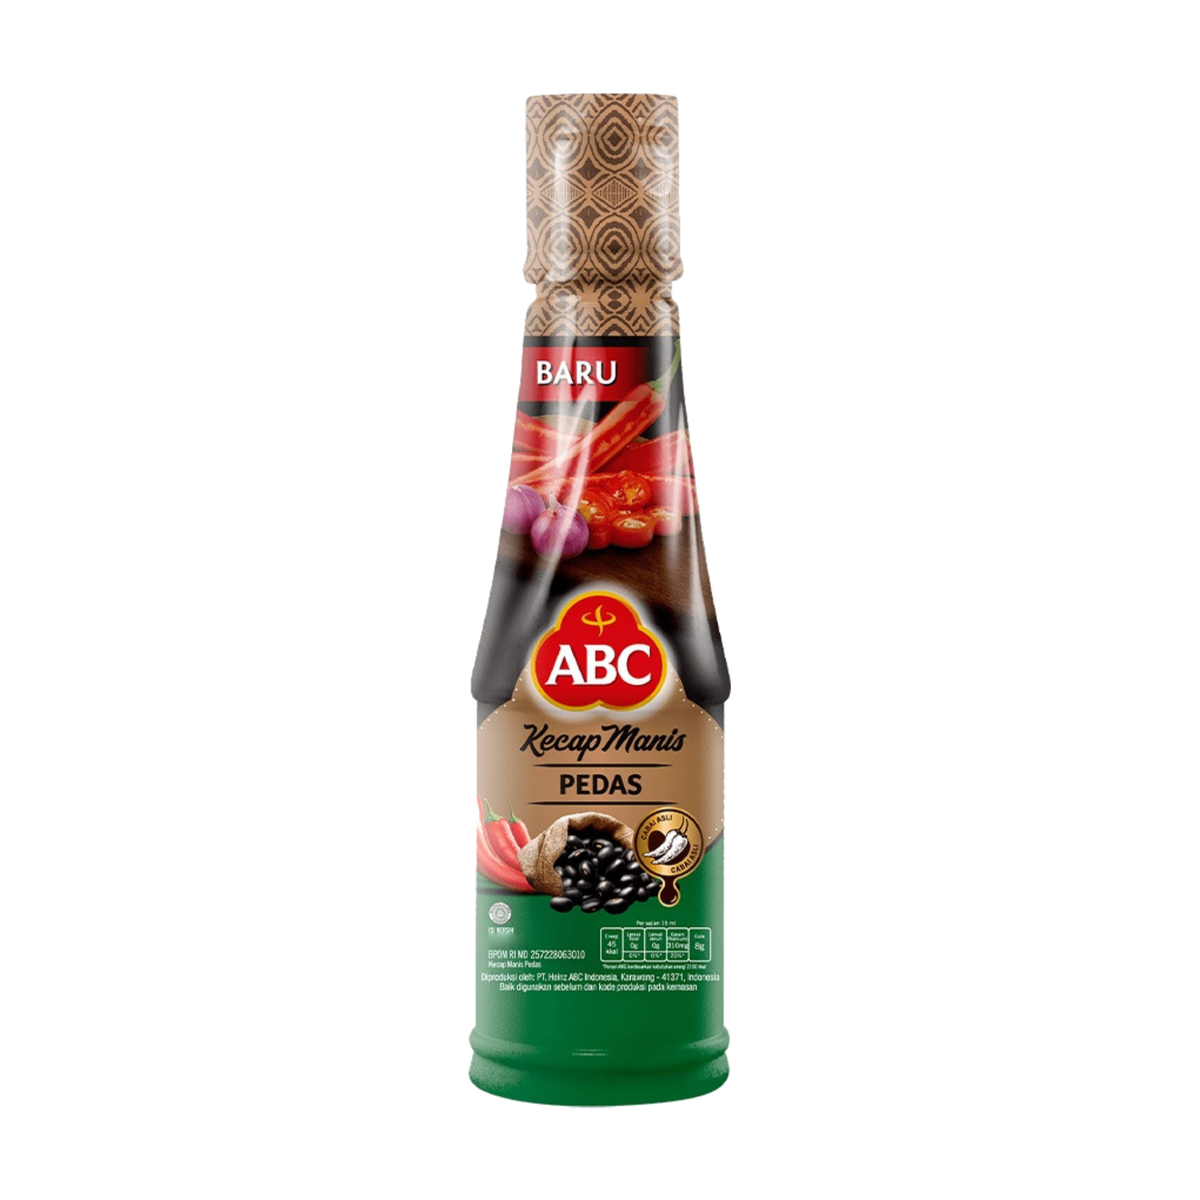 ABC Soy Sauce Spicy Botol 275ml